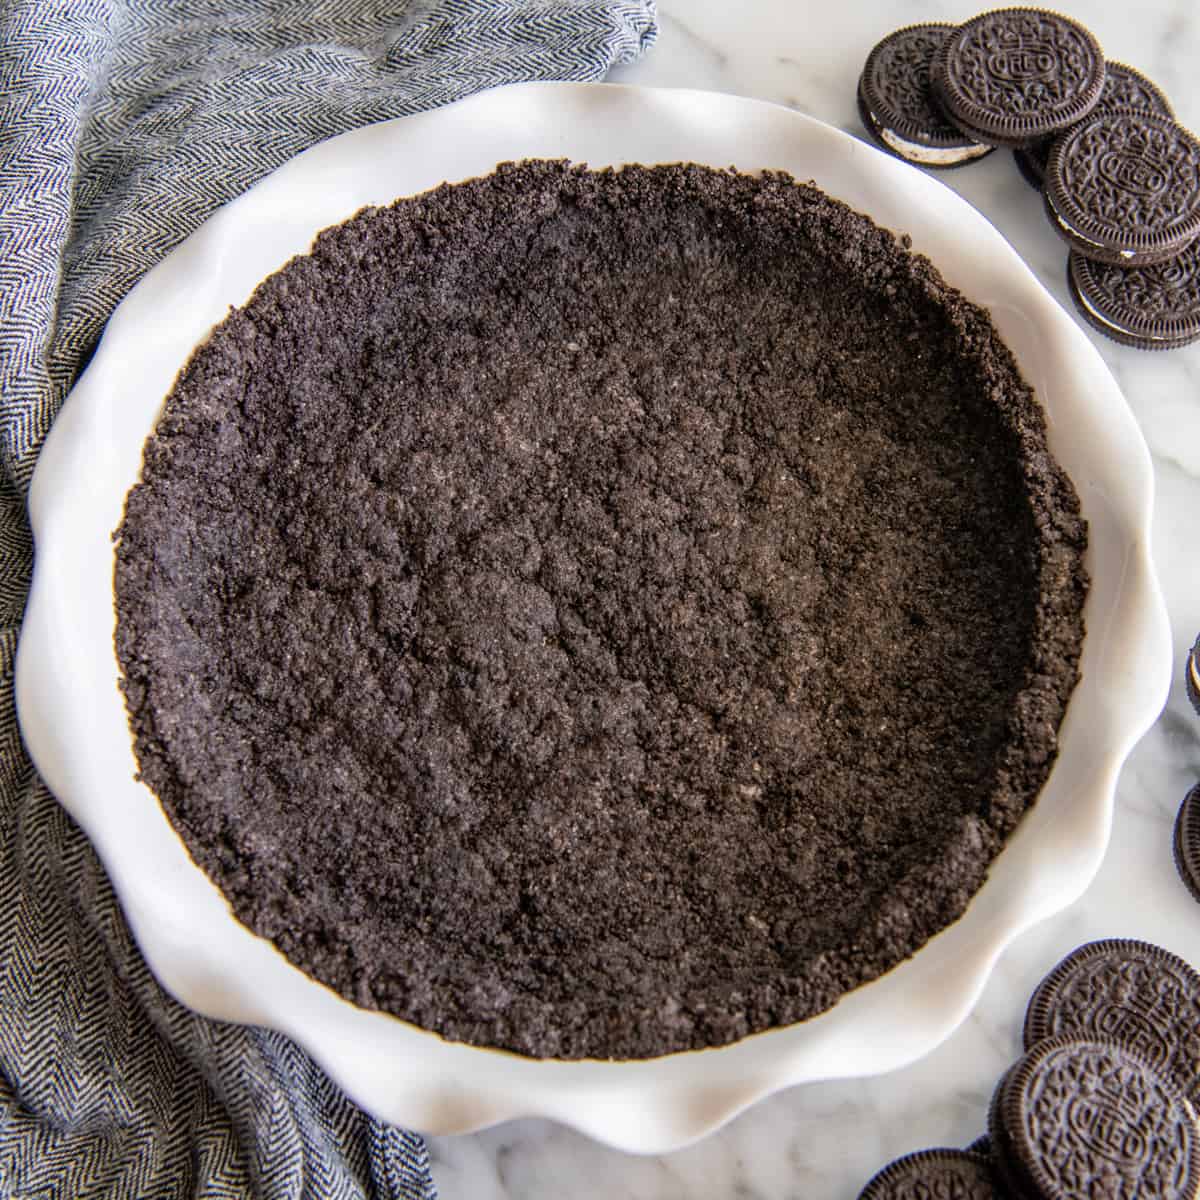 oreo crust baked in a white pie dish